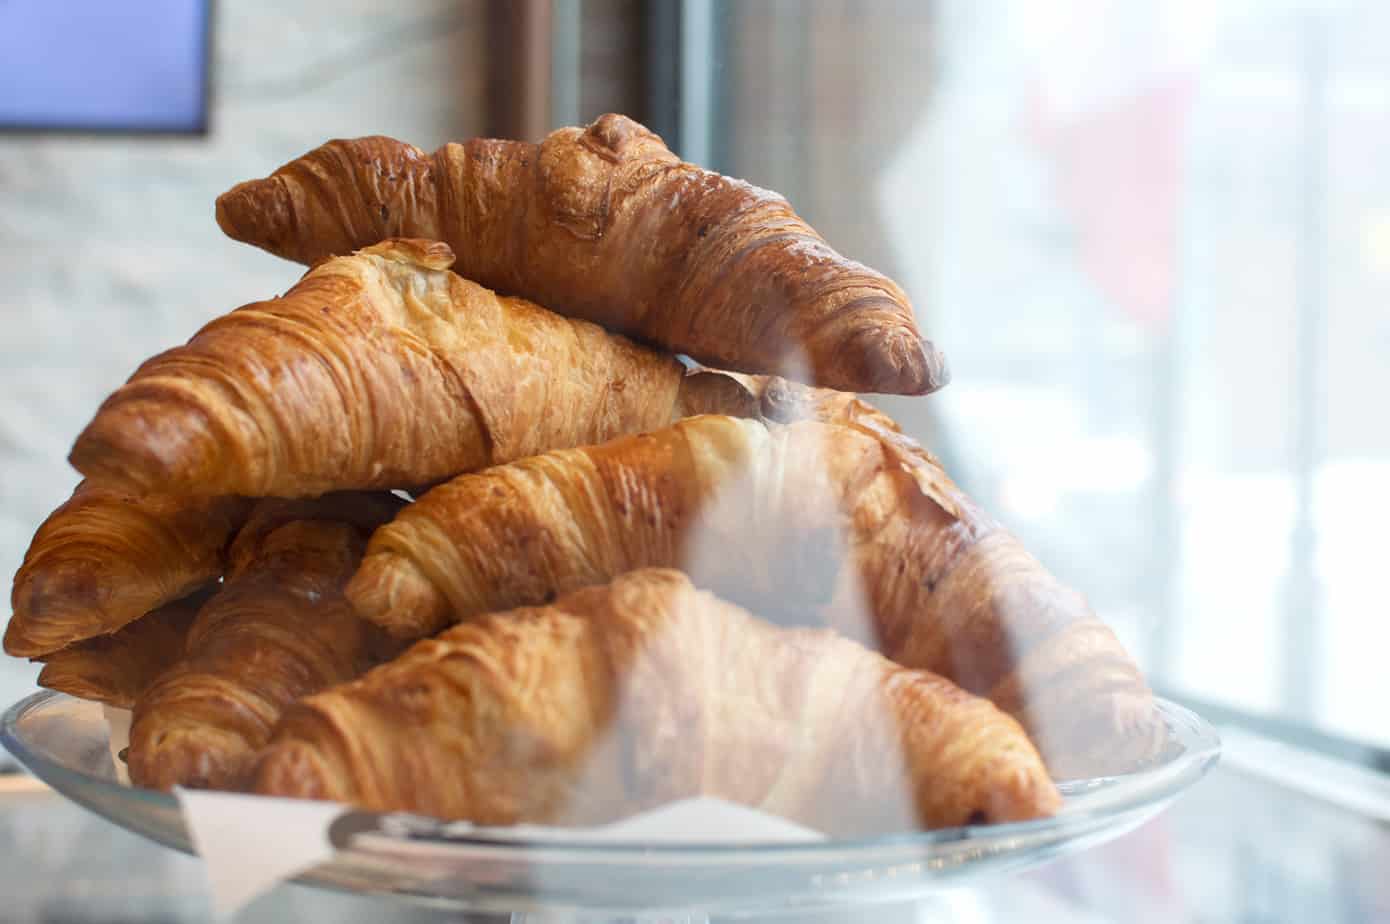 A pile of croissants on a plate